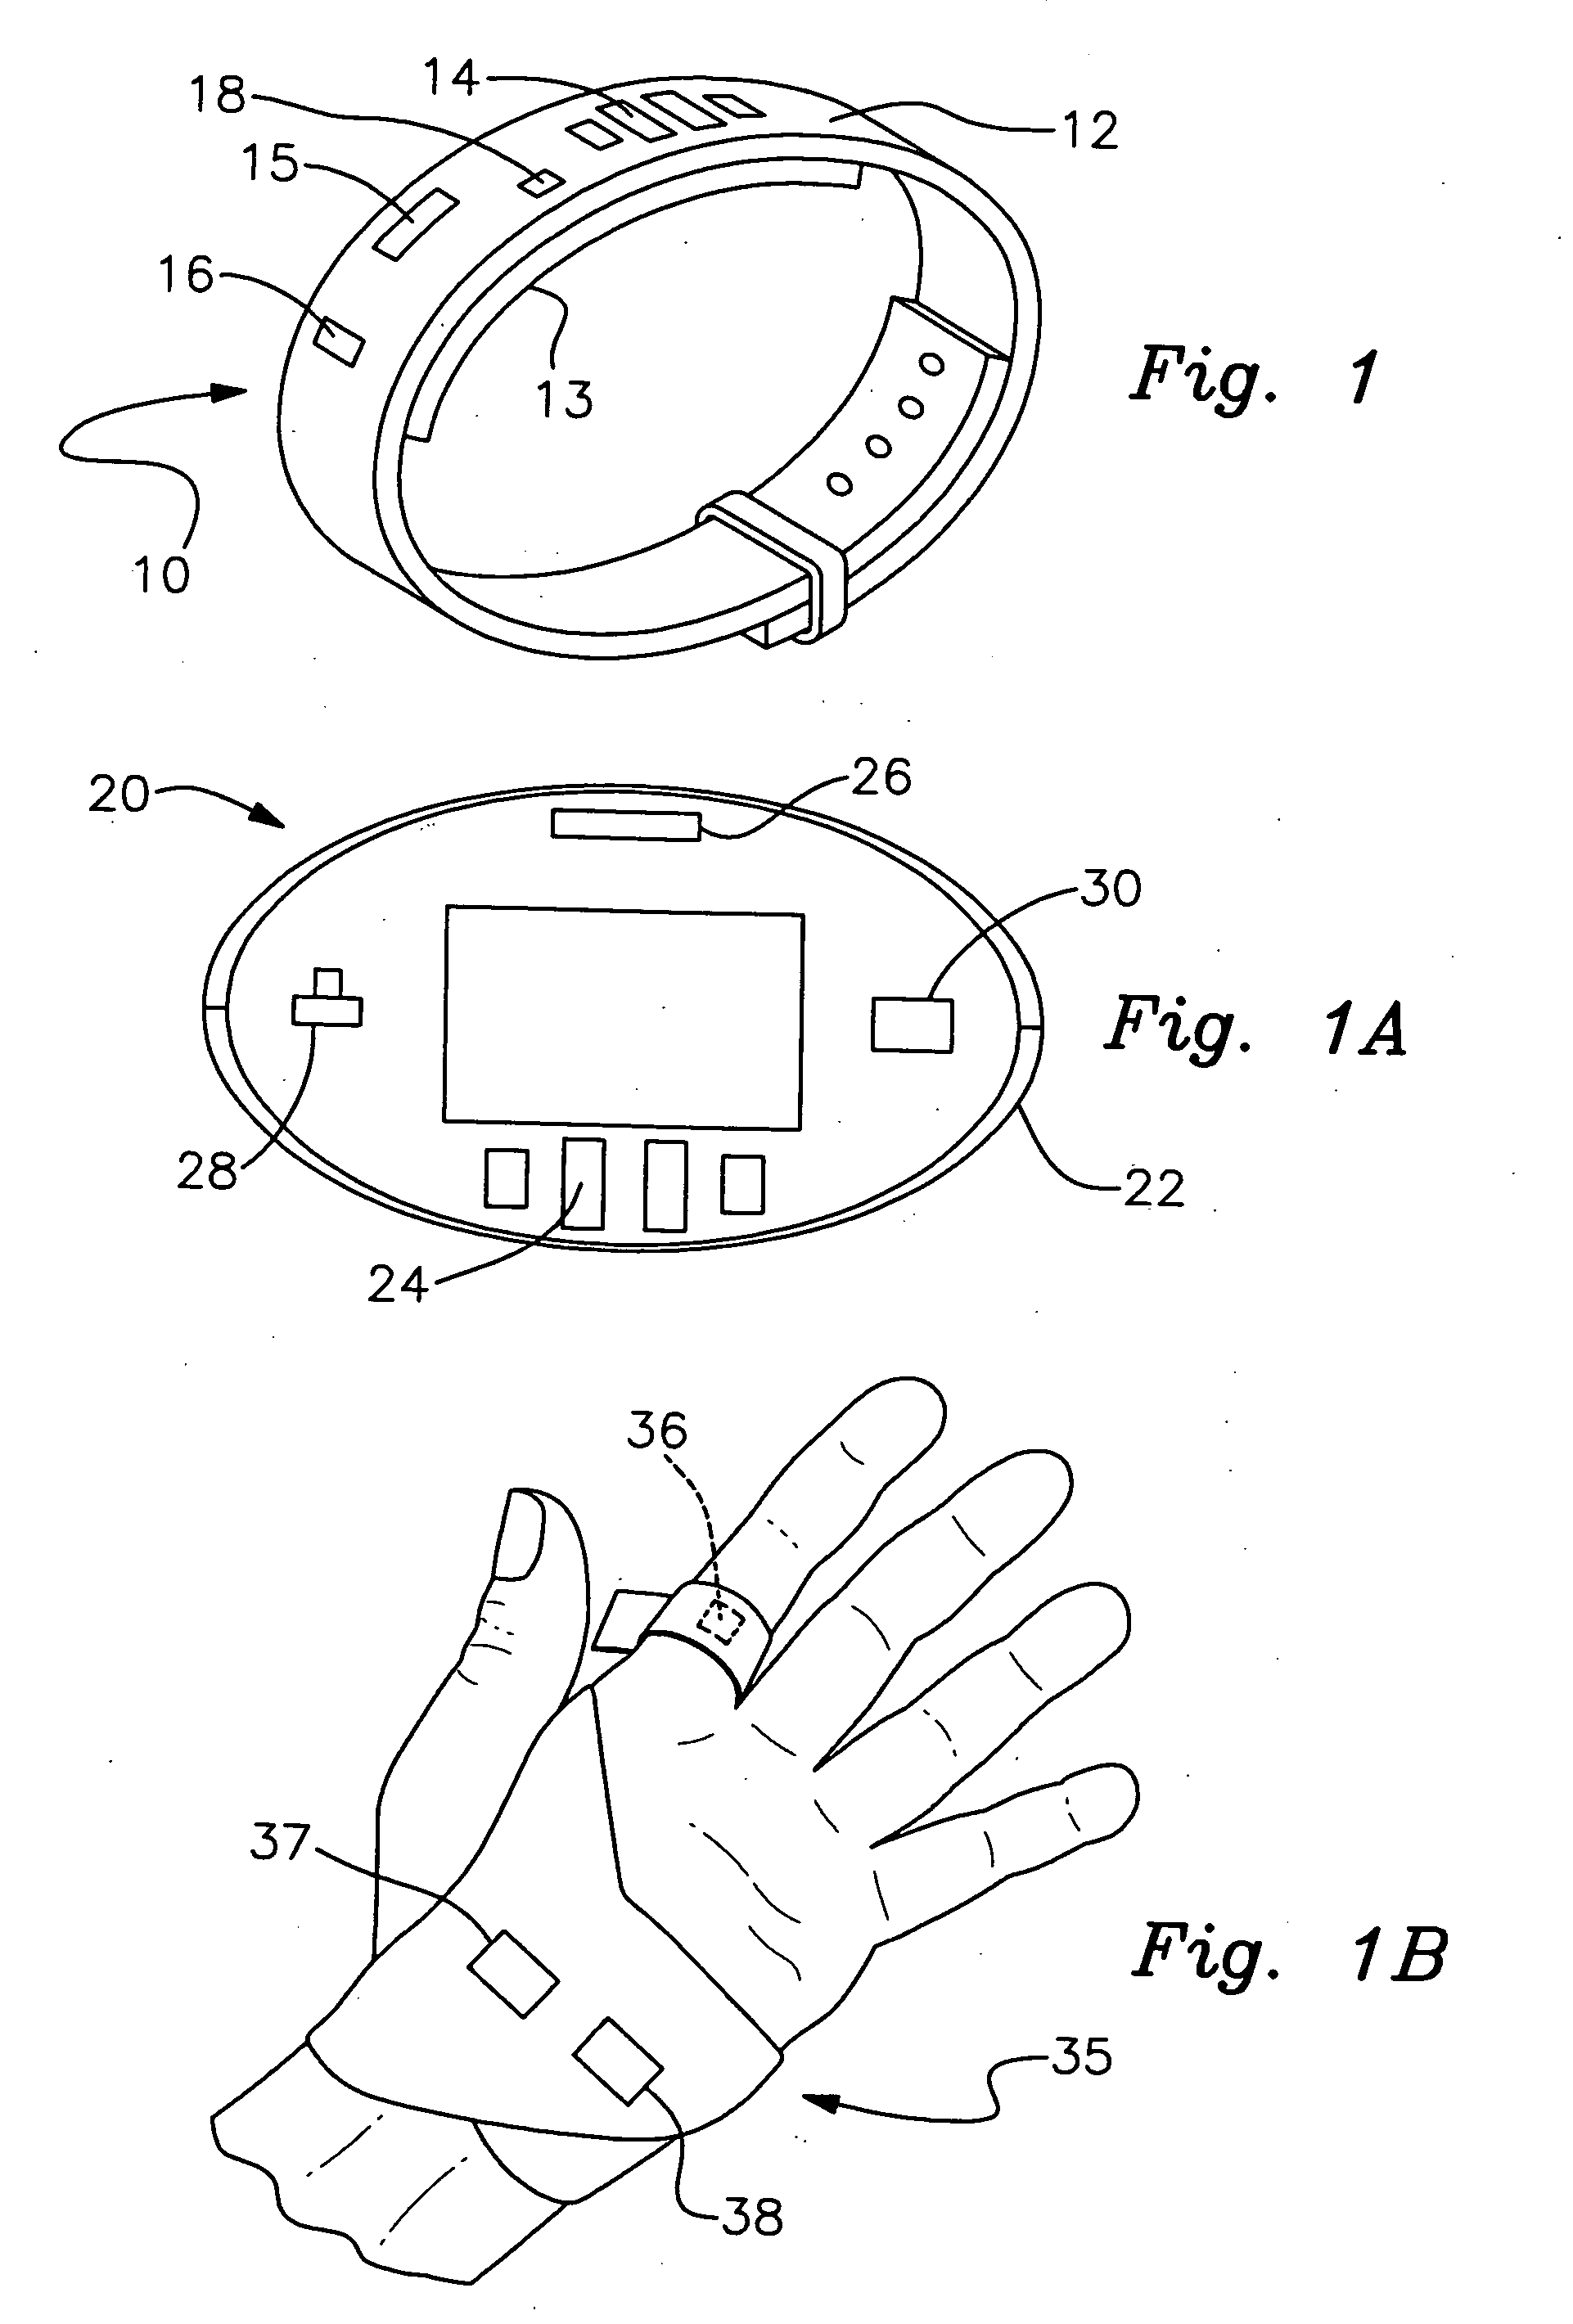 Personal emergency condition detection and safety systems and methods